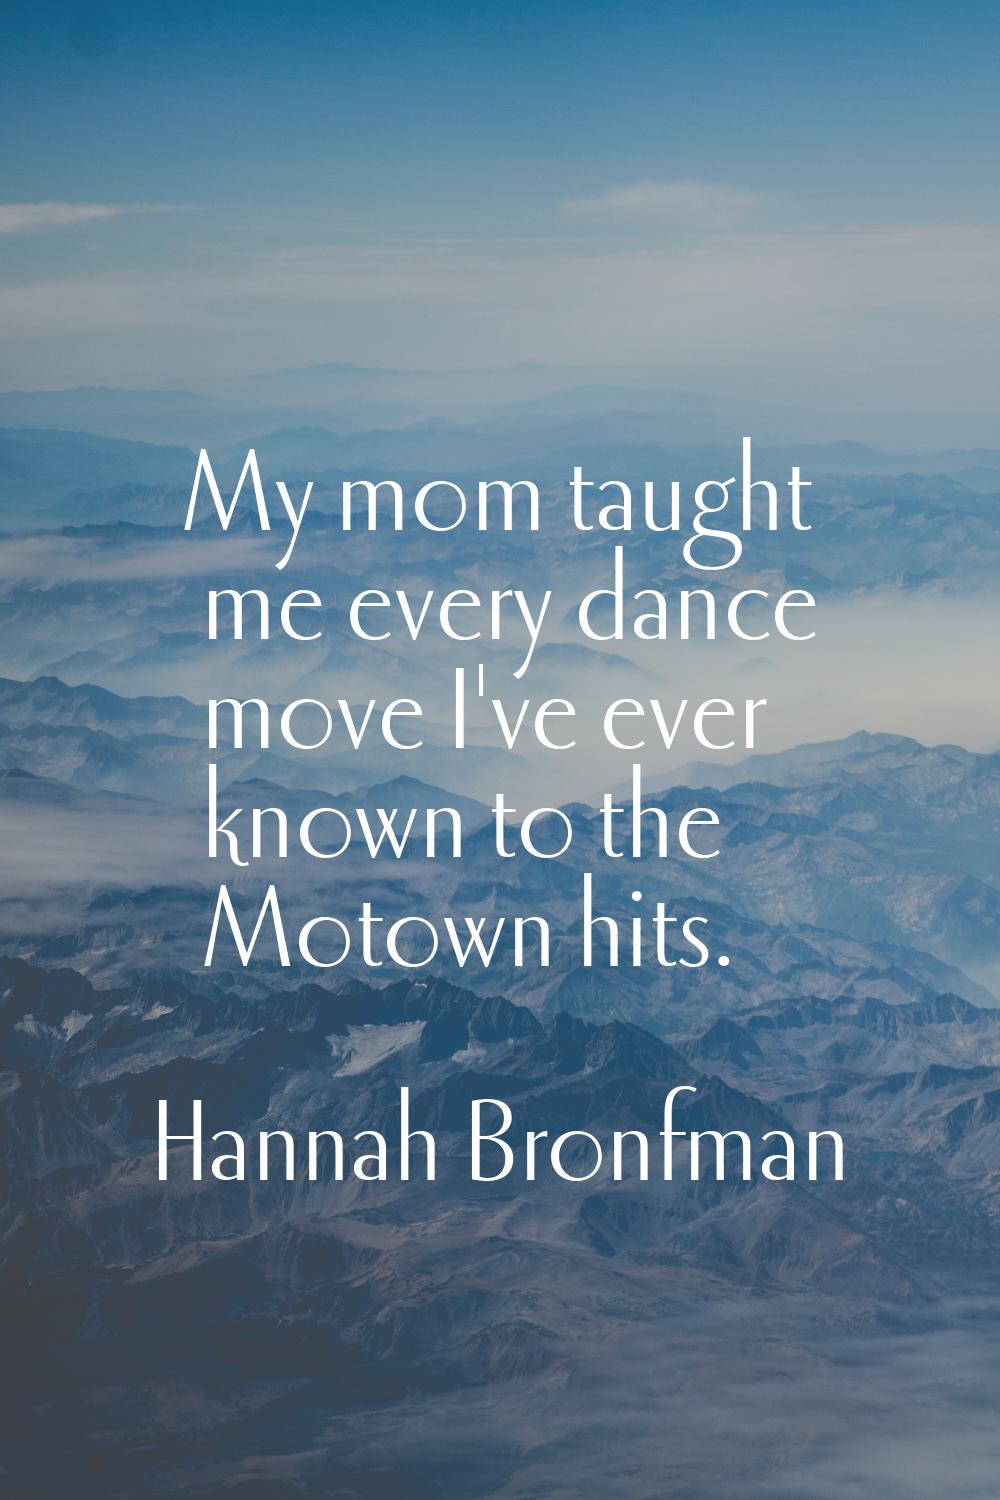 My mom taught me every dance move I've ever known to the Motown hits.